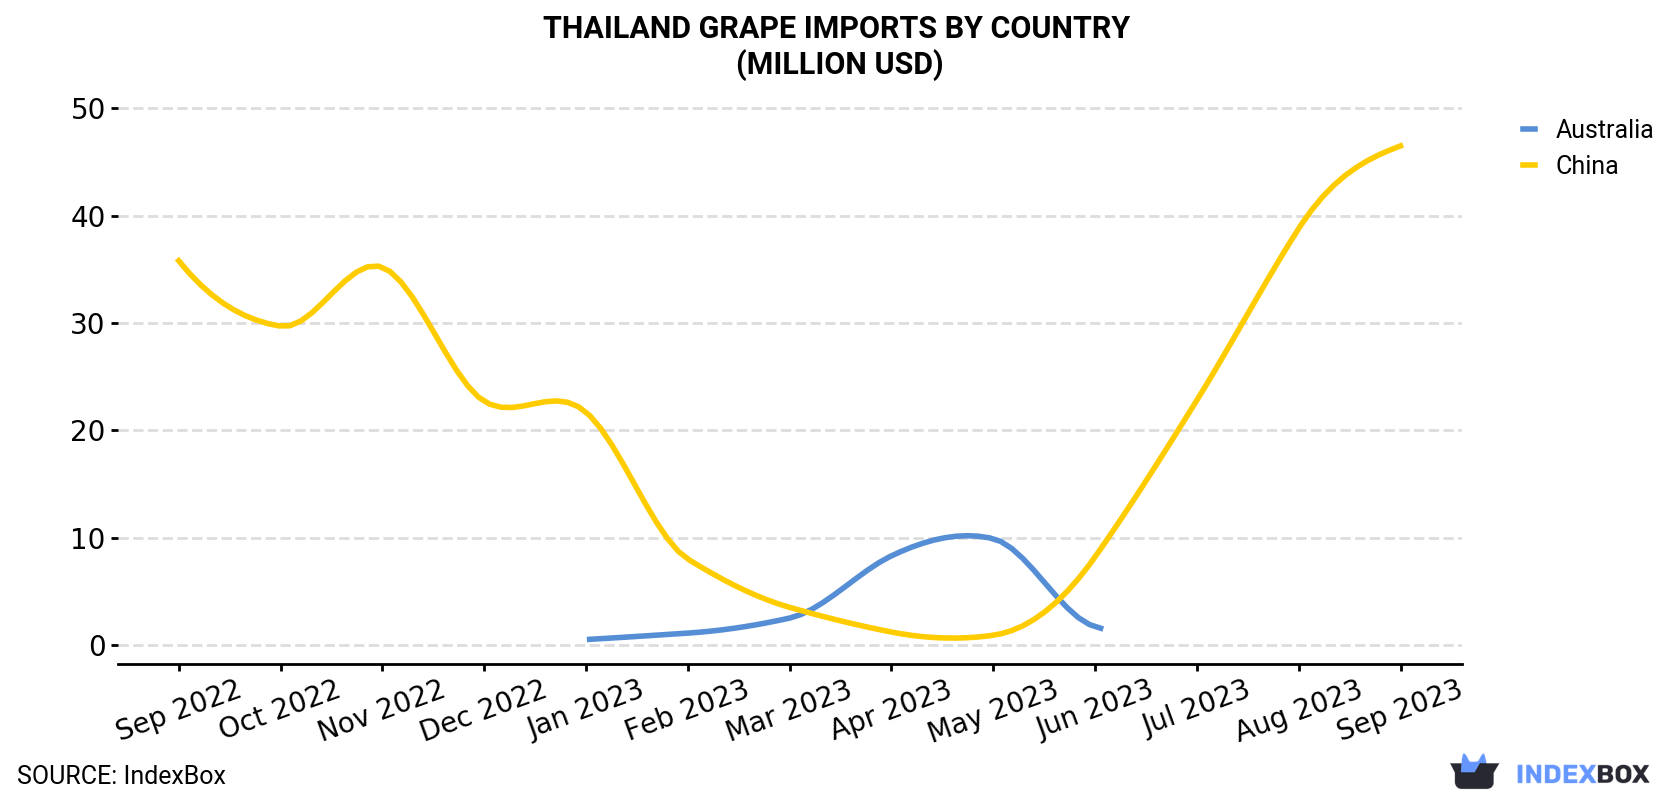 Thailand Grape Imports By Country (Million USD)